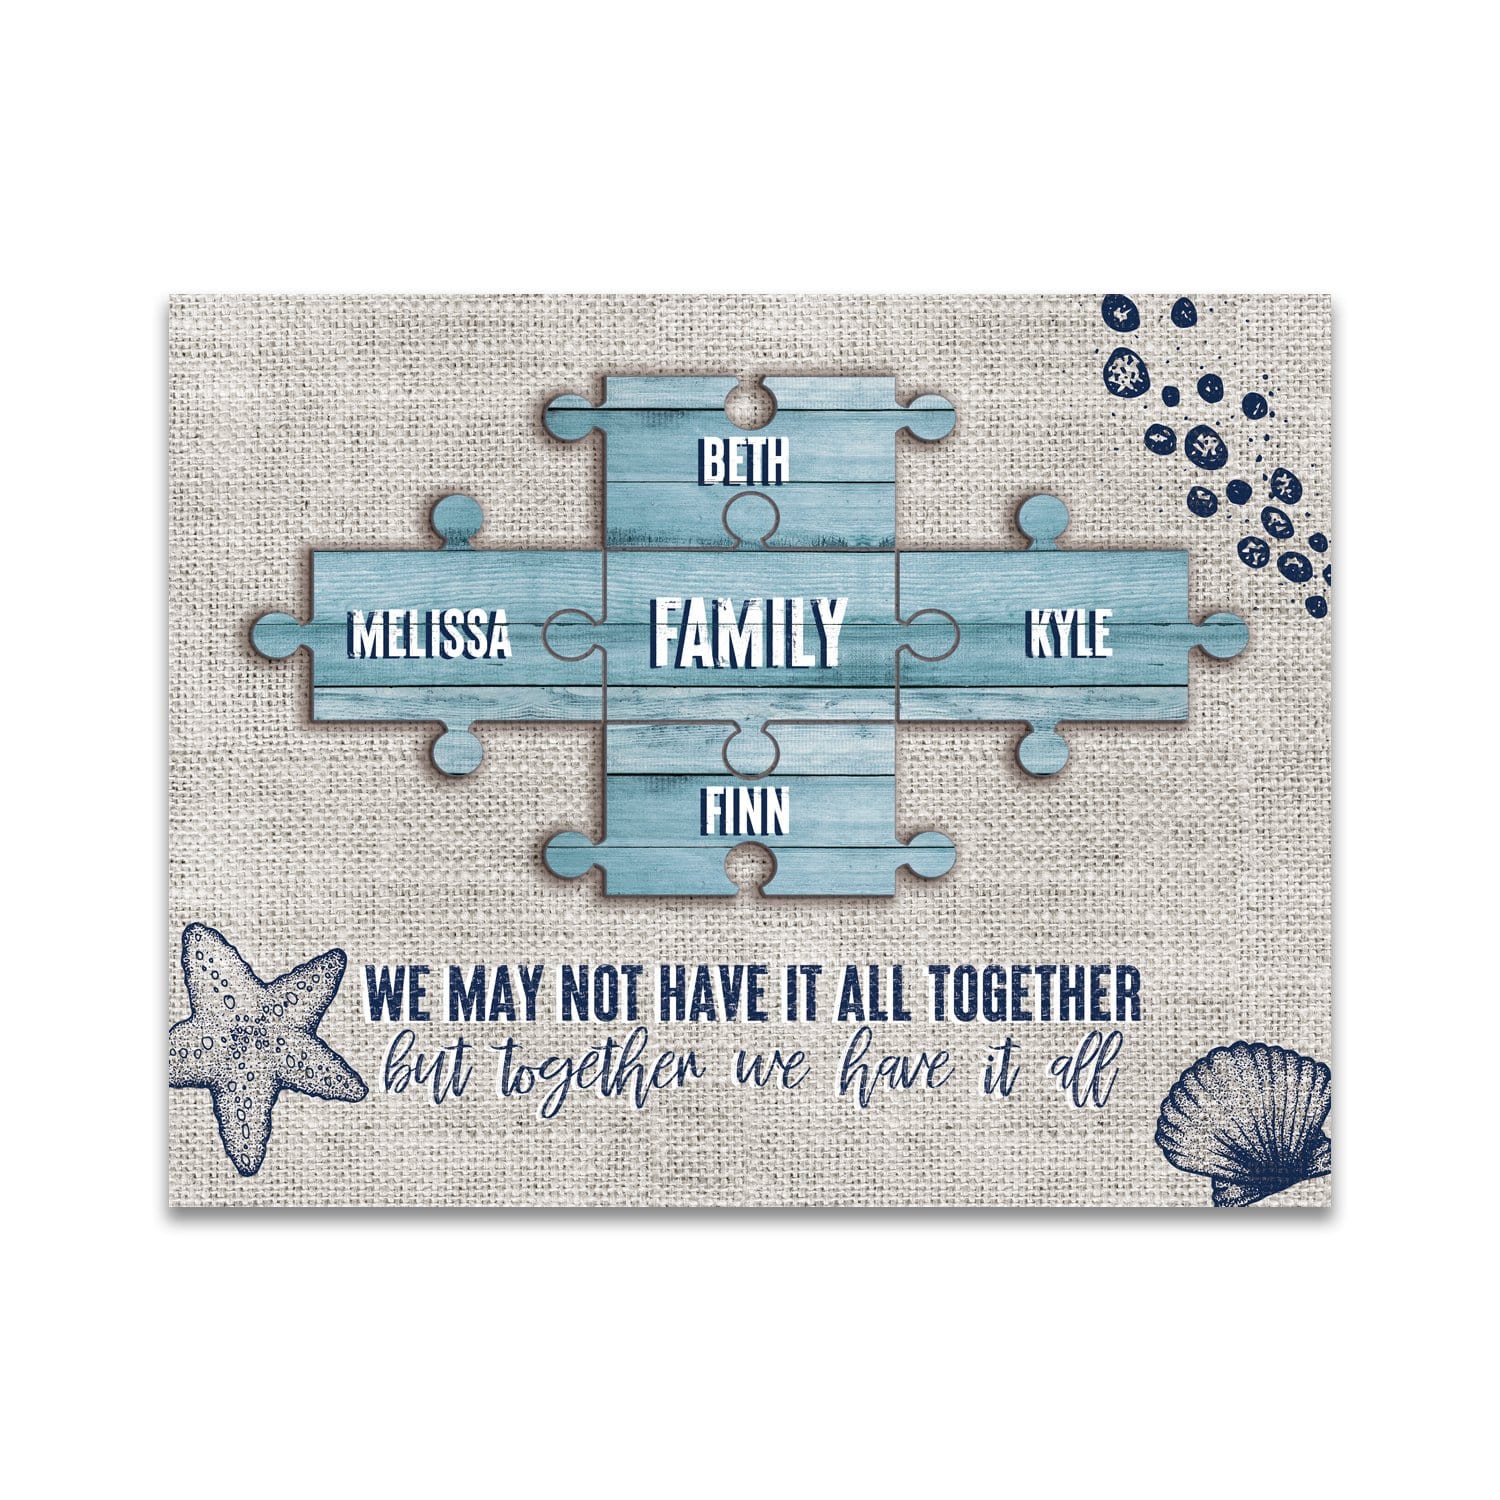 Personalized beach decor for your family. Quote reads "We may not have it all together, but together we have it all". 